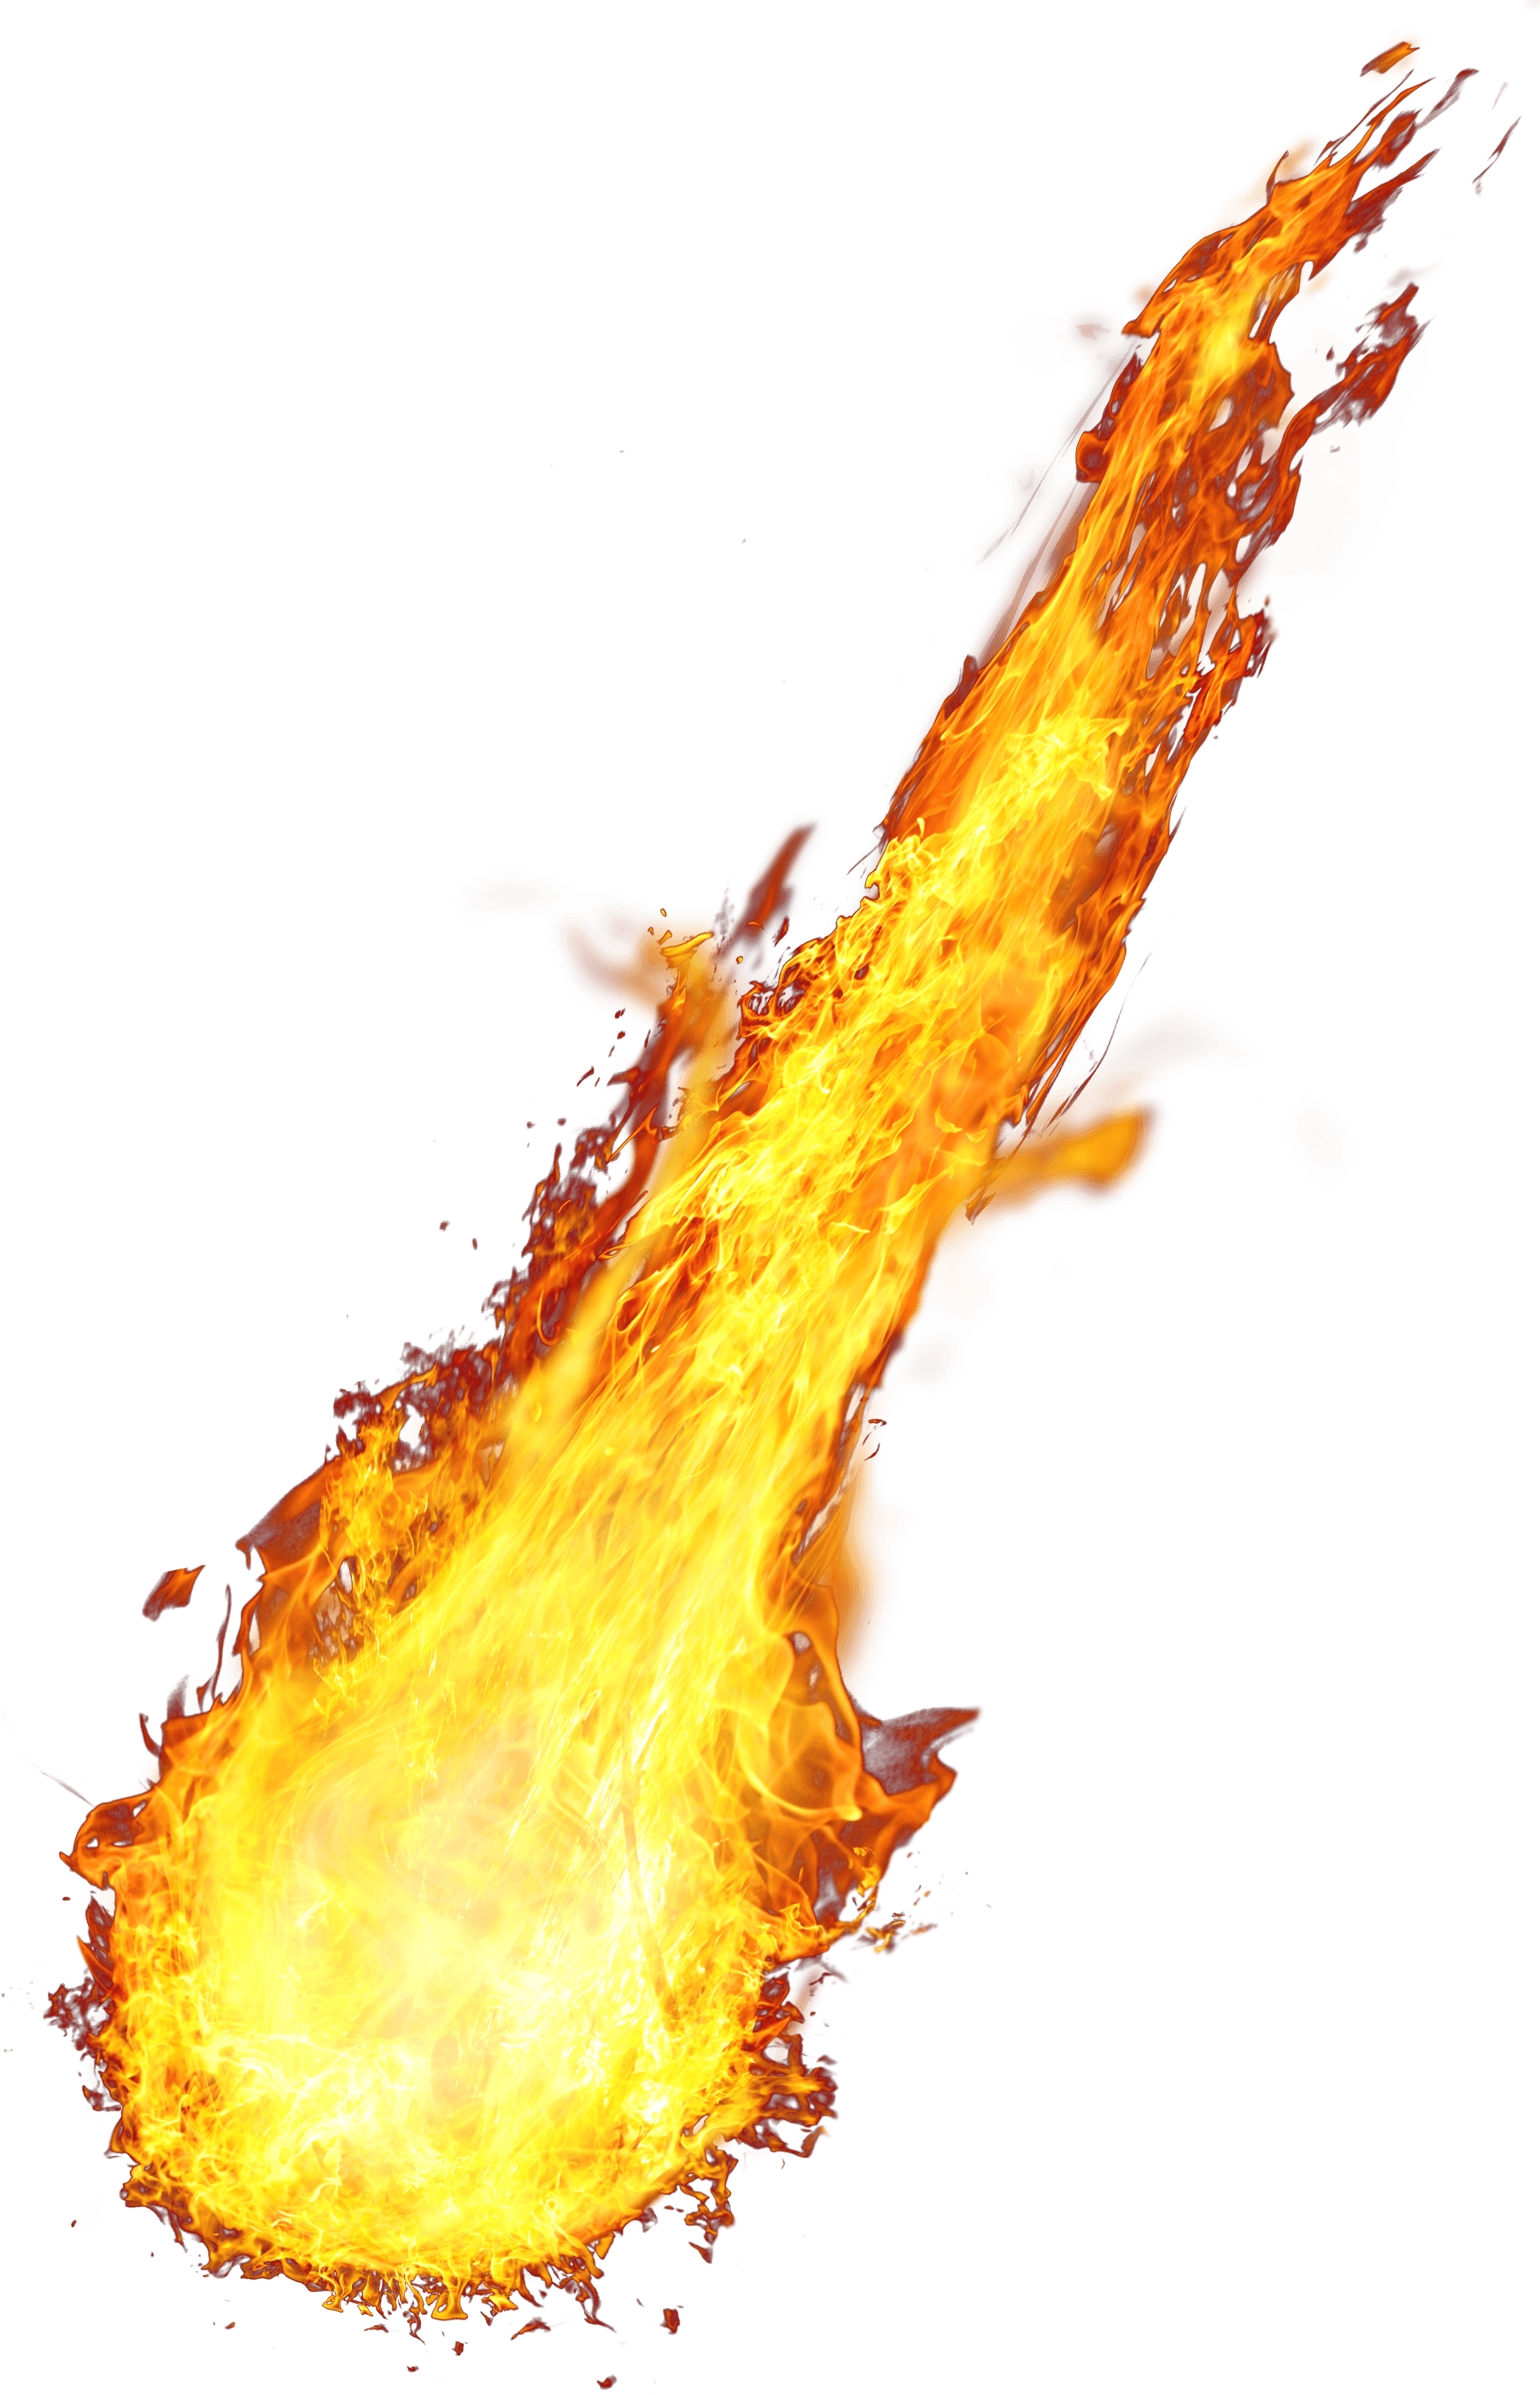 Fire PNGs for Free Download